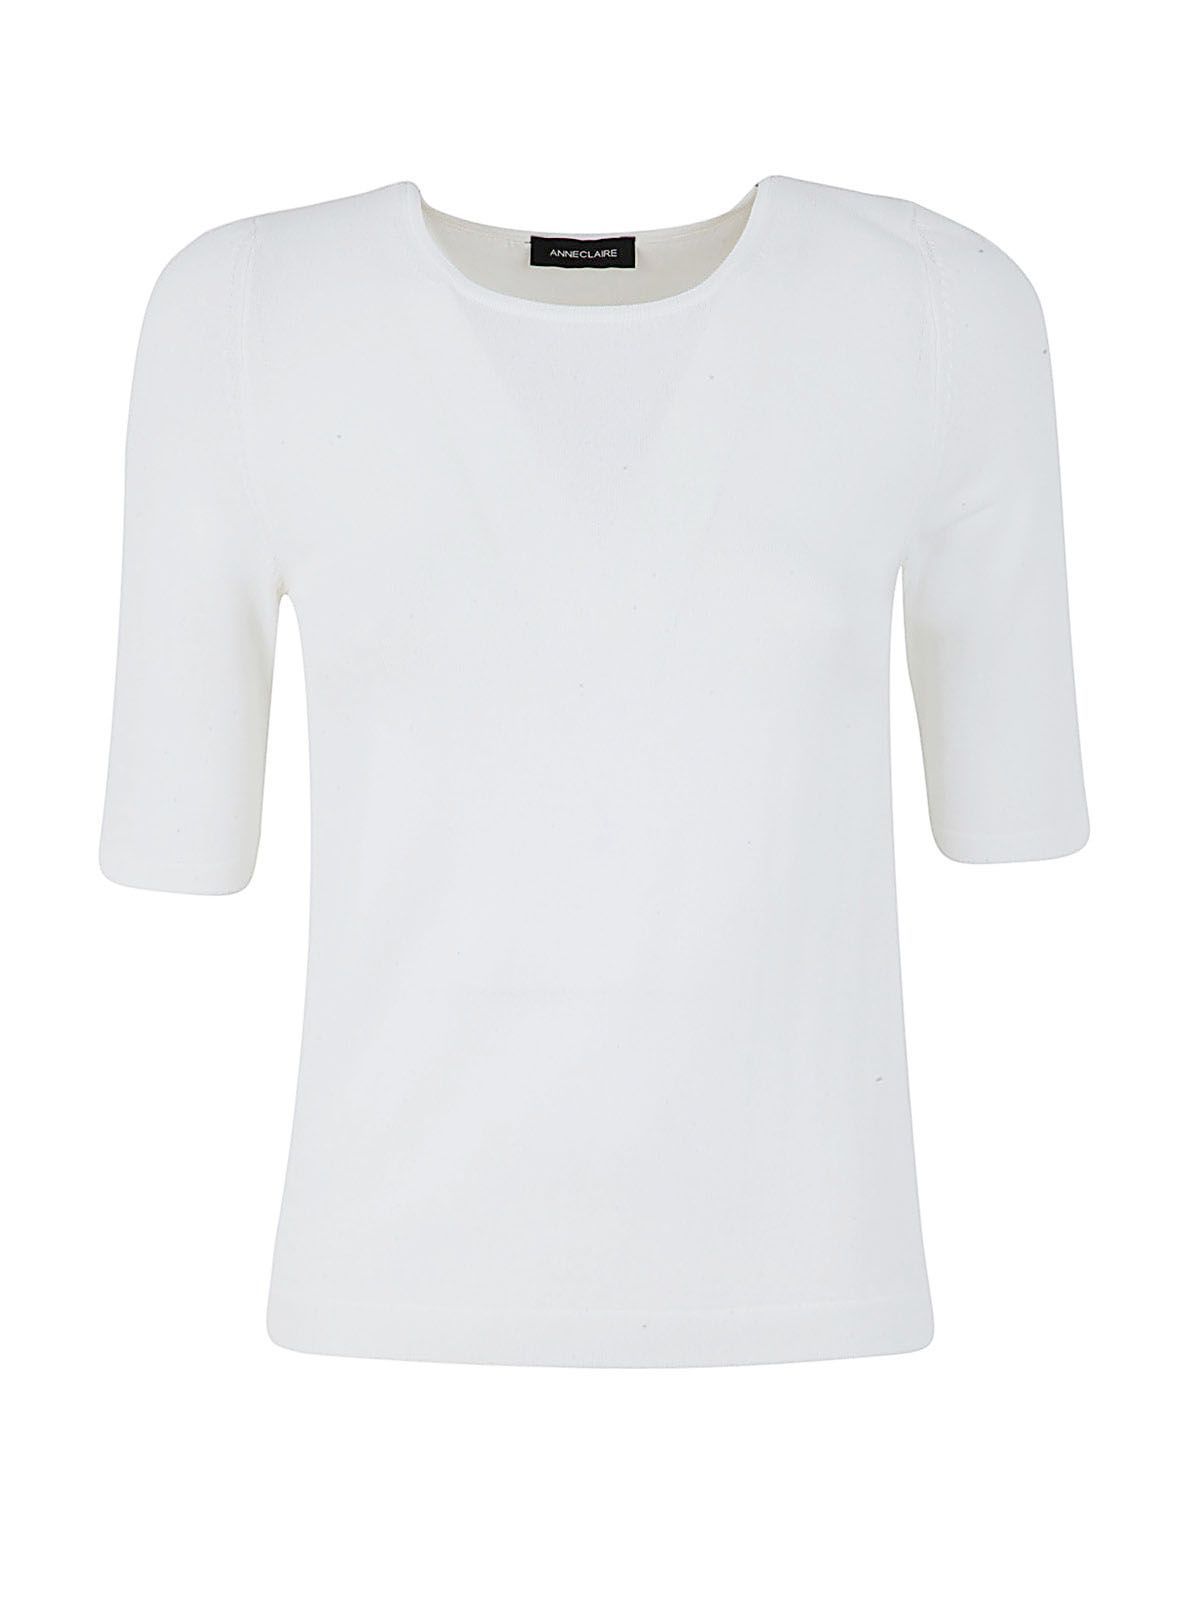 Anneclaire 3/4 Sleeves Crew Neck T-shirt In White